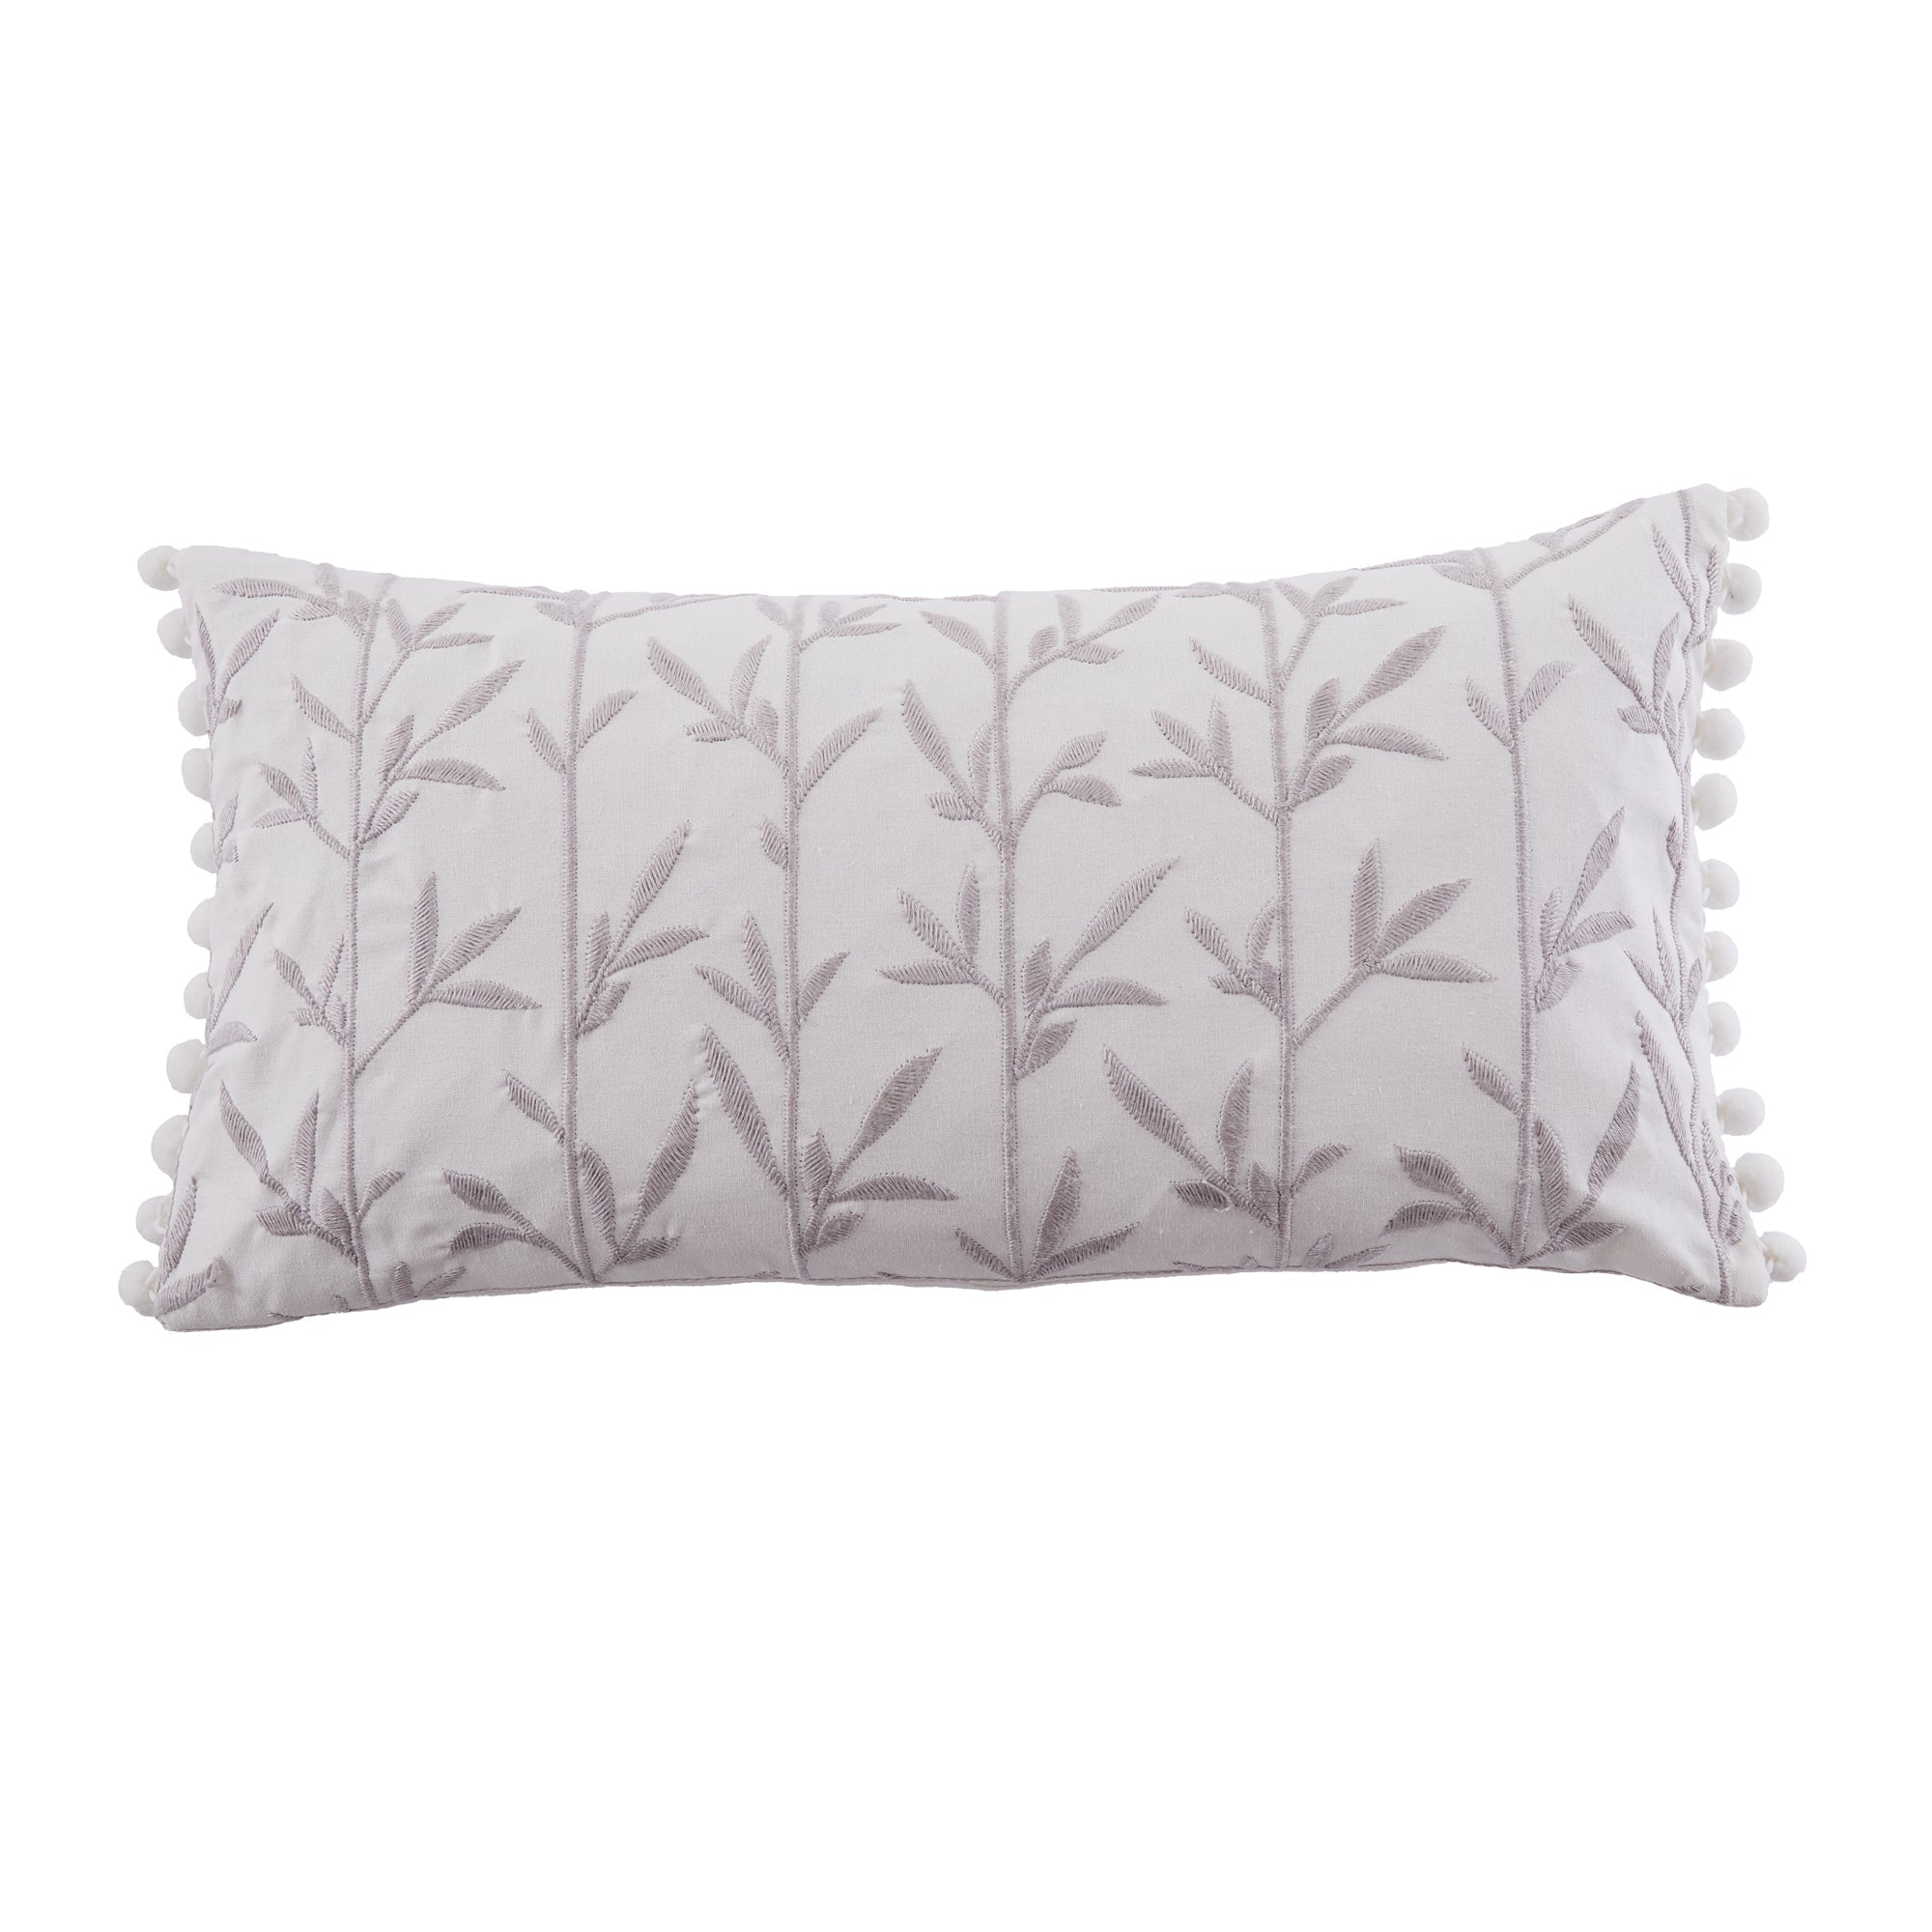 Pippa Embroidered Leaves Pom Pillow